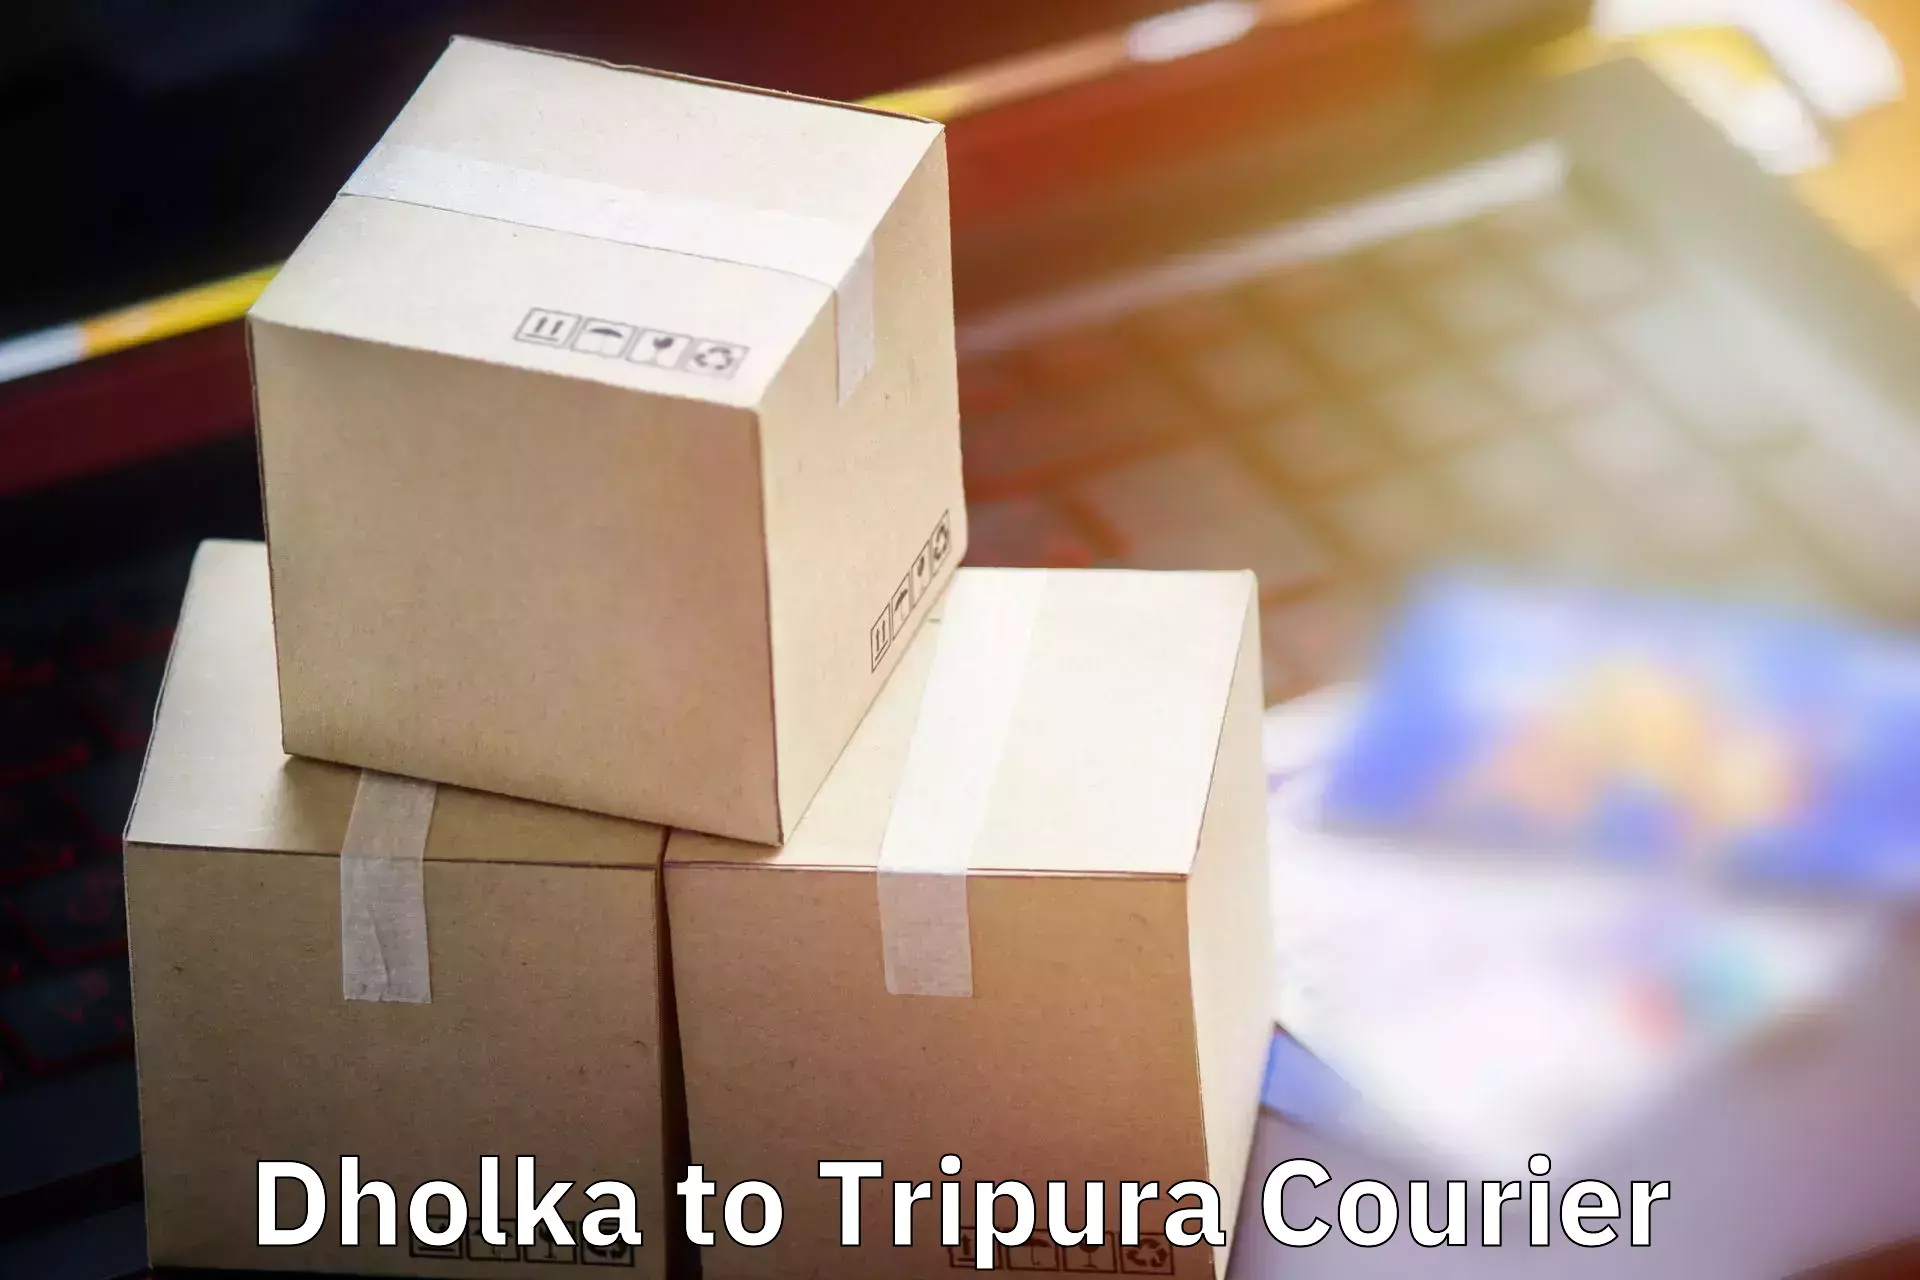 Luggage shipment specialists Dholka to Tripura